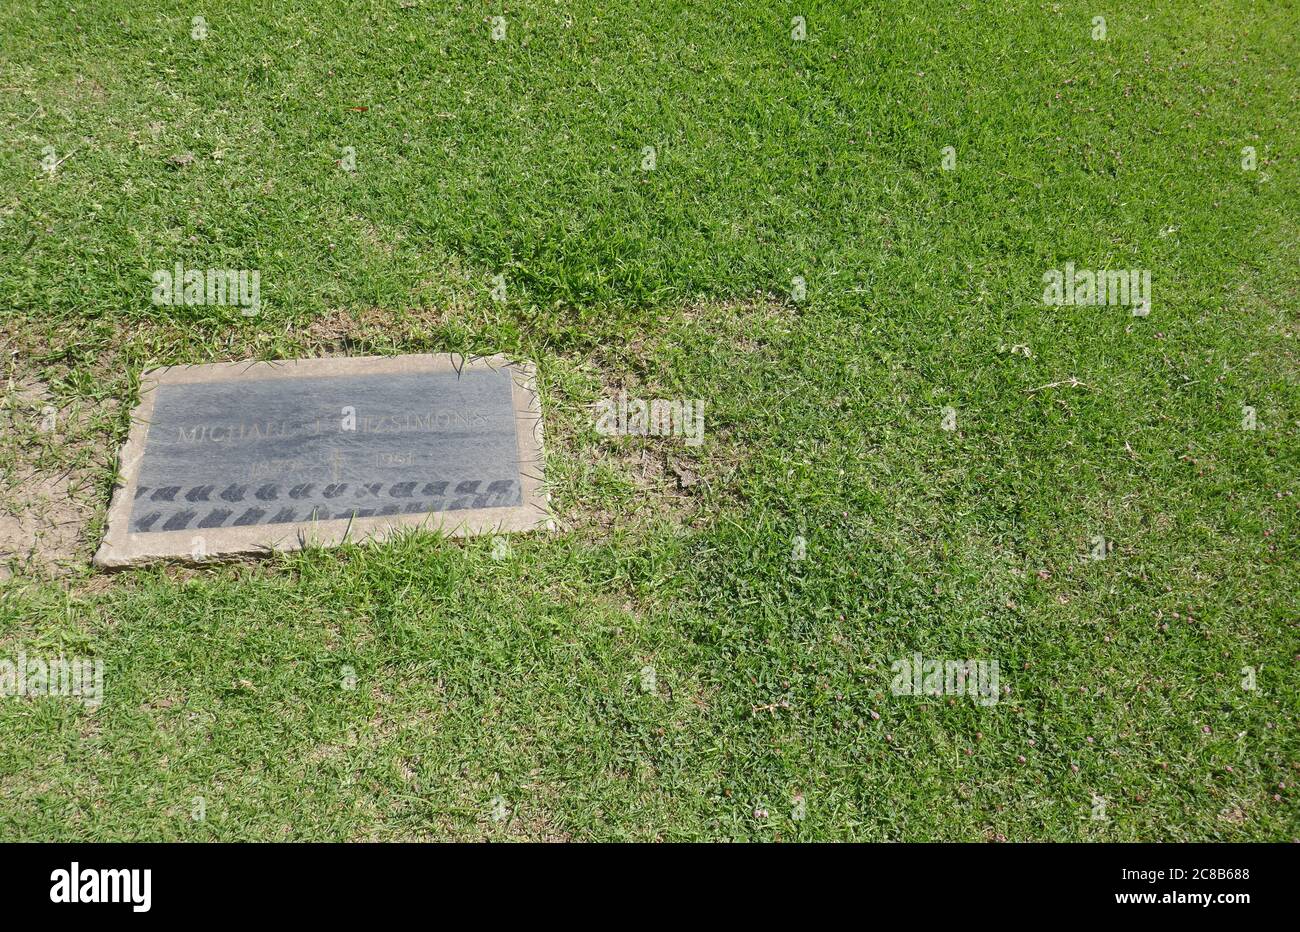 Culver City, California, USA 22nd July 2020 A general view of atmosphere of Pinto Colvig's unmarked Grave at Holy Cross Cemetery on July 22, 2020 in Culver City, California, USA. Photo by Barry King/Alamy Stock Photo Stock Photo